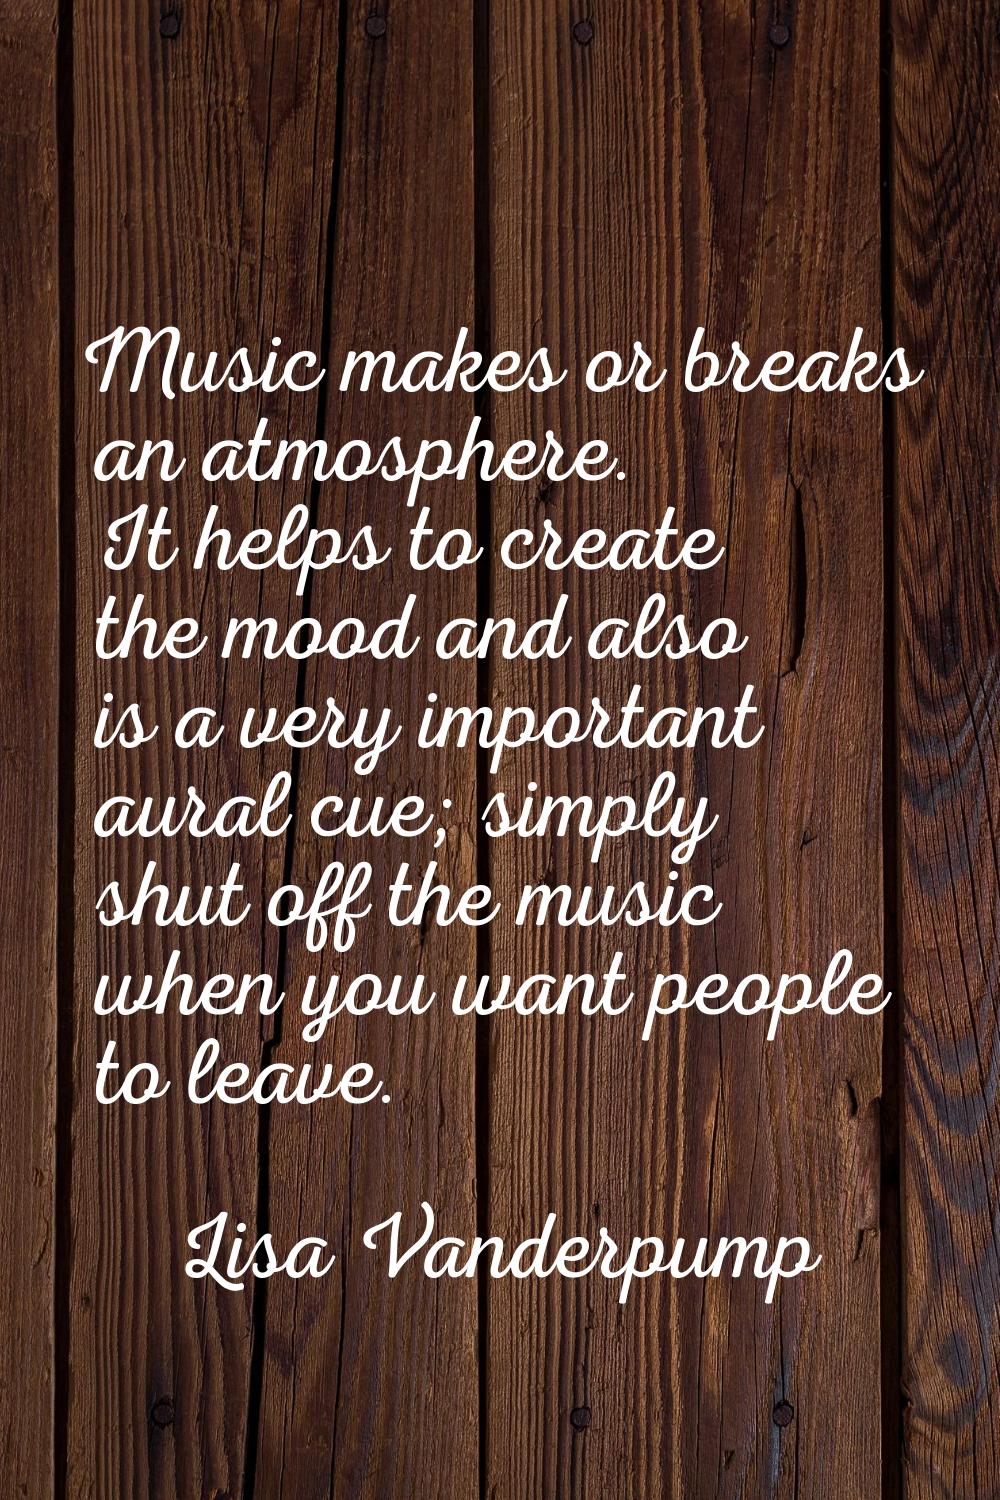 Music makes or breaks an atmosphere. It helps to create the mood and also is a very important aural